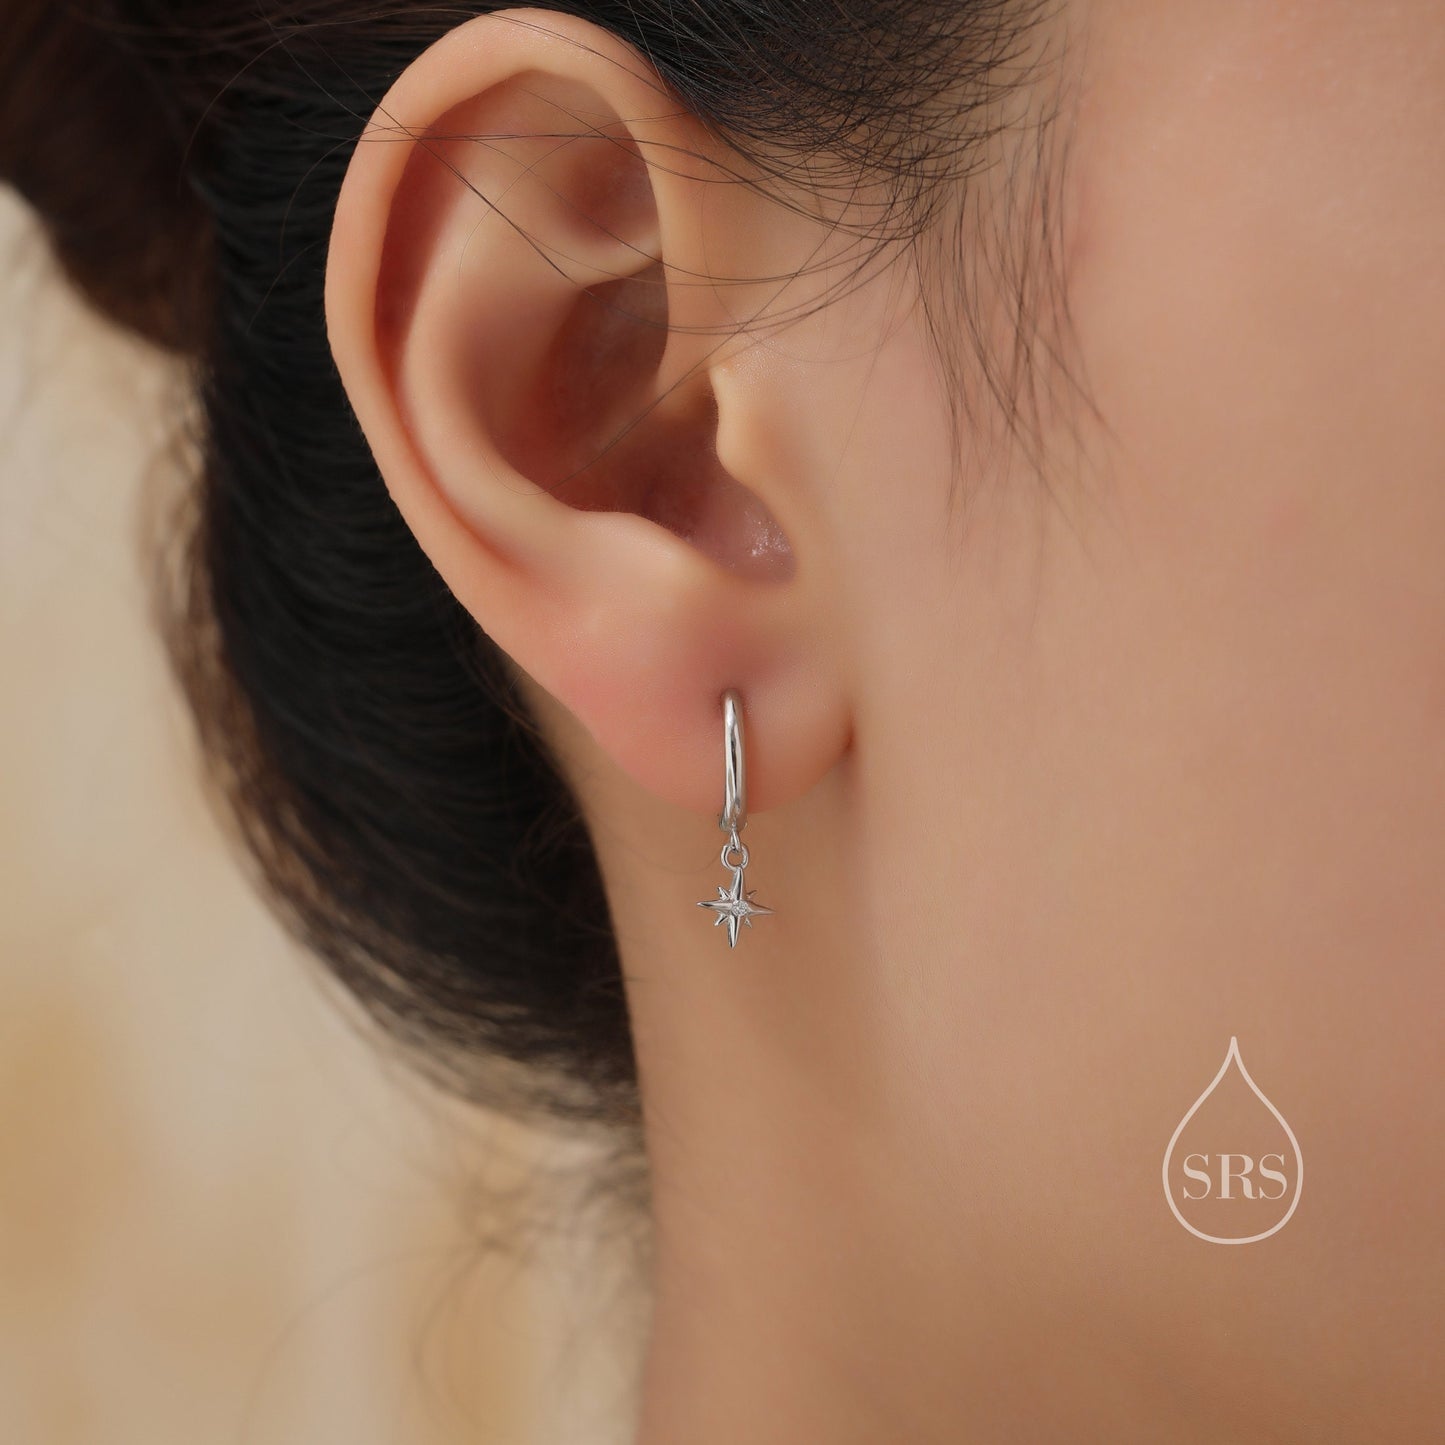 Asymmetric Moon and Star Dangle Huggie Hoop Earrings in Sterling Silver, Silver or Gold or Rose Gold, Tiny Moon and Star Skinny Hoops